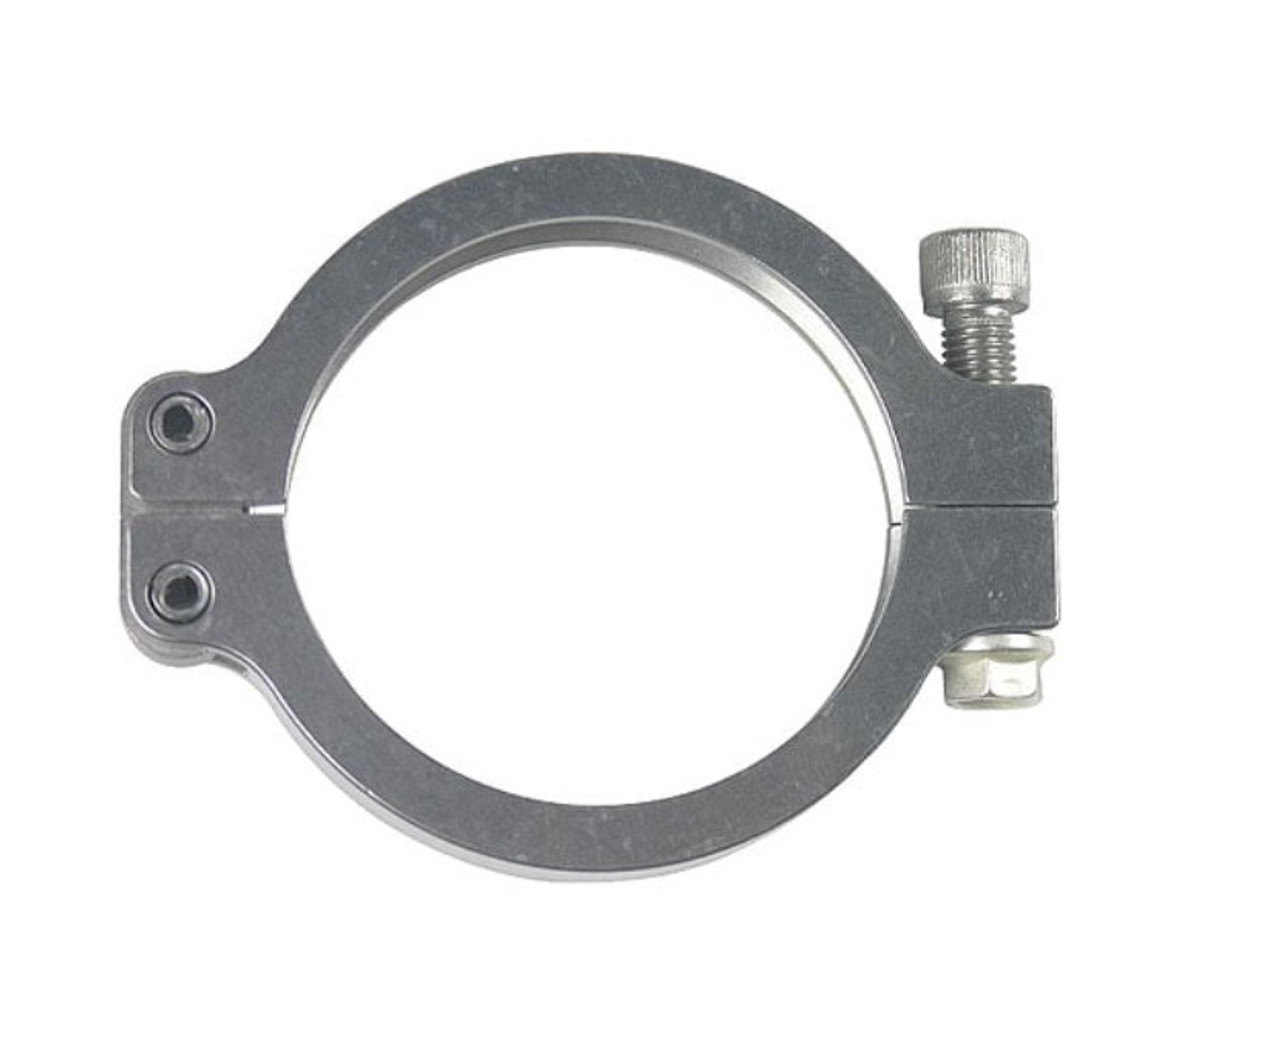 TiAL Sport MVS Optional Inlet V-Band Clamp